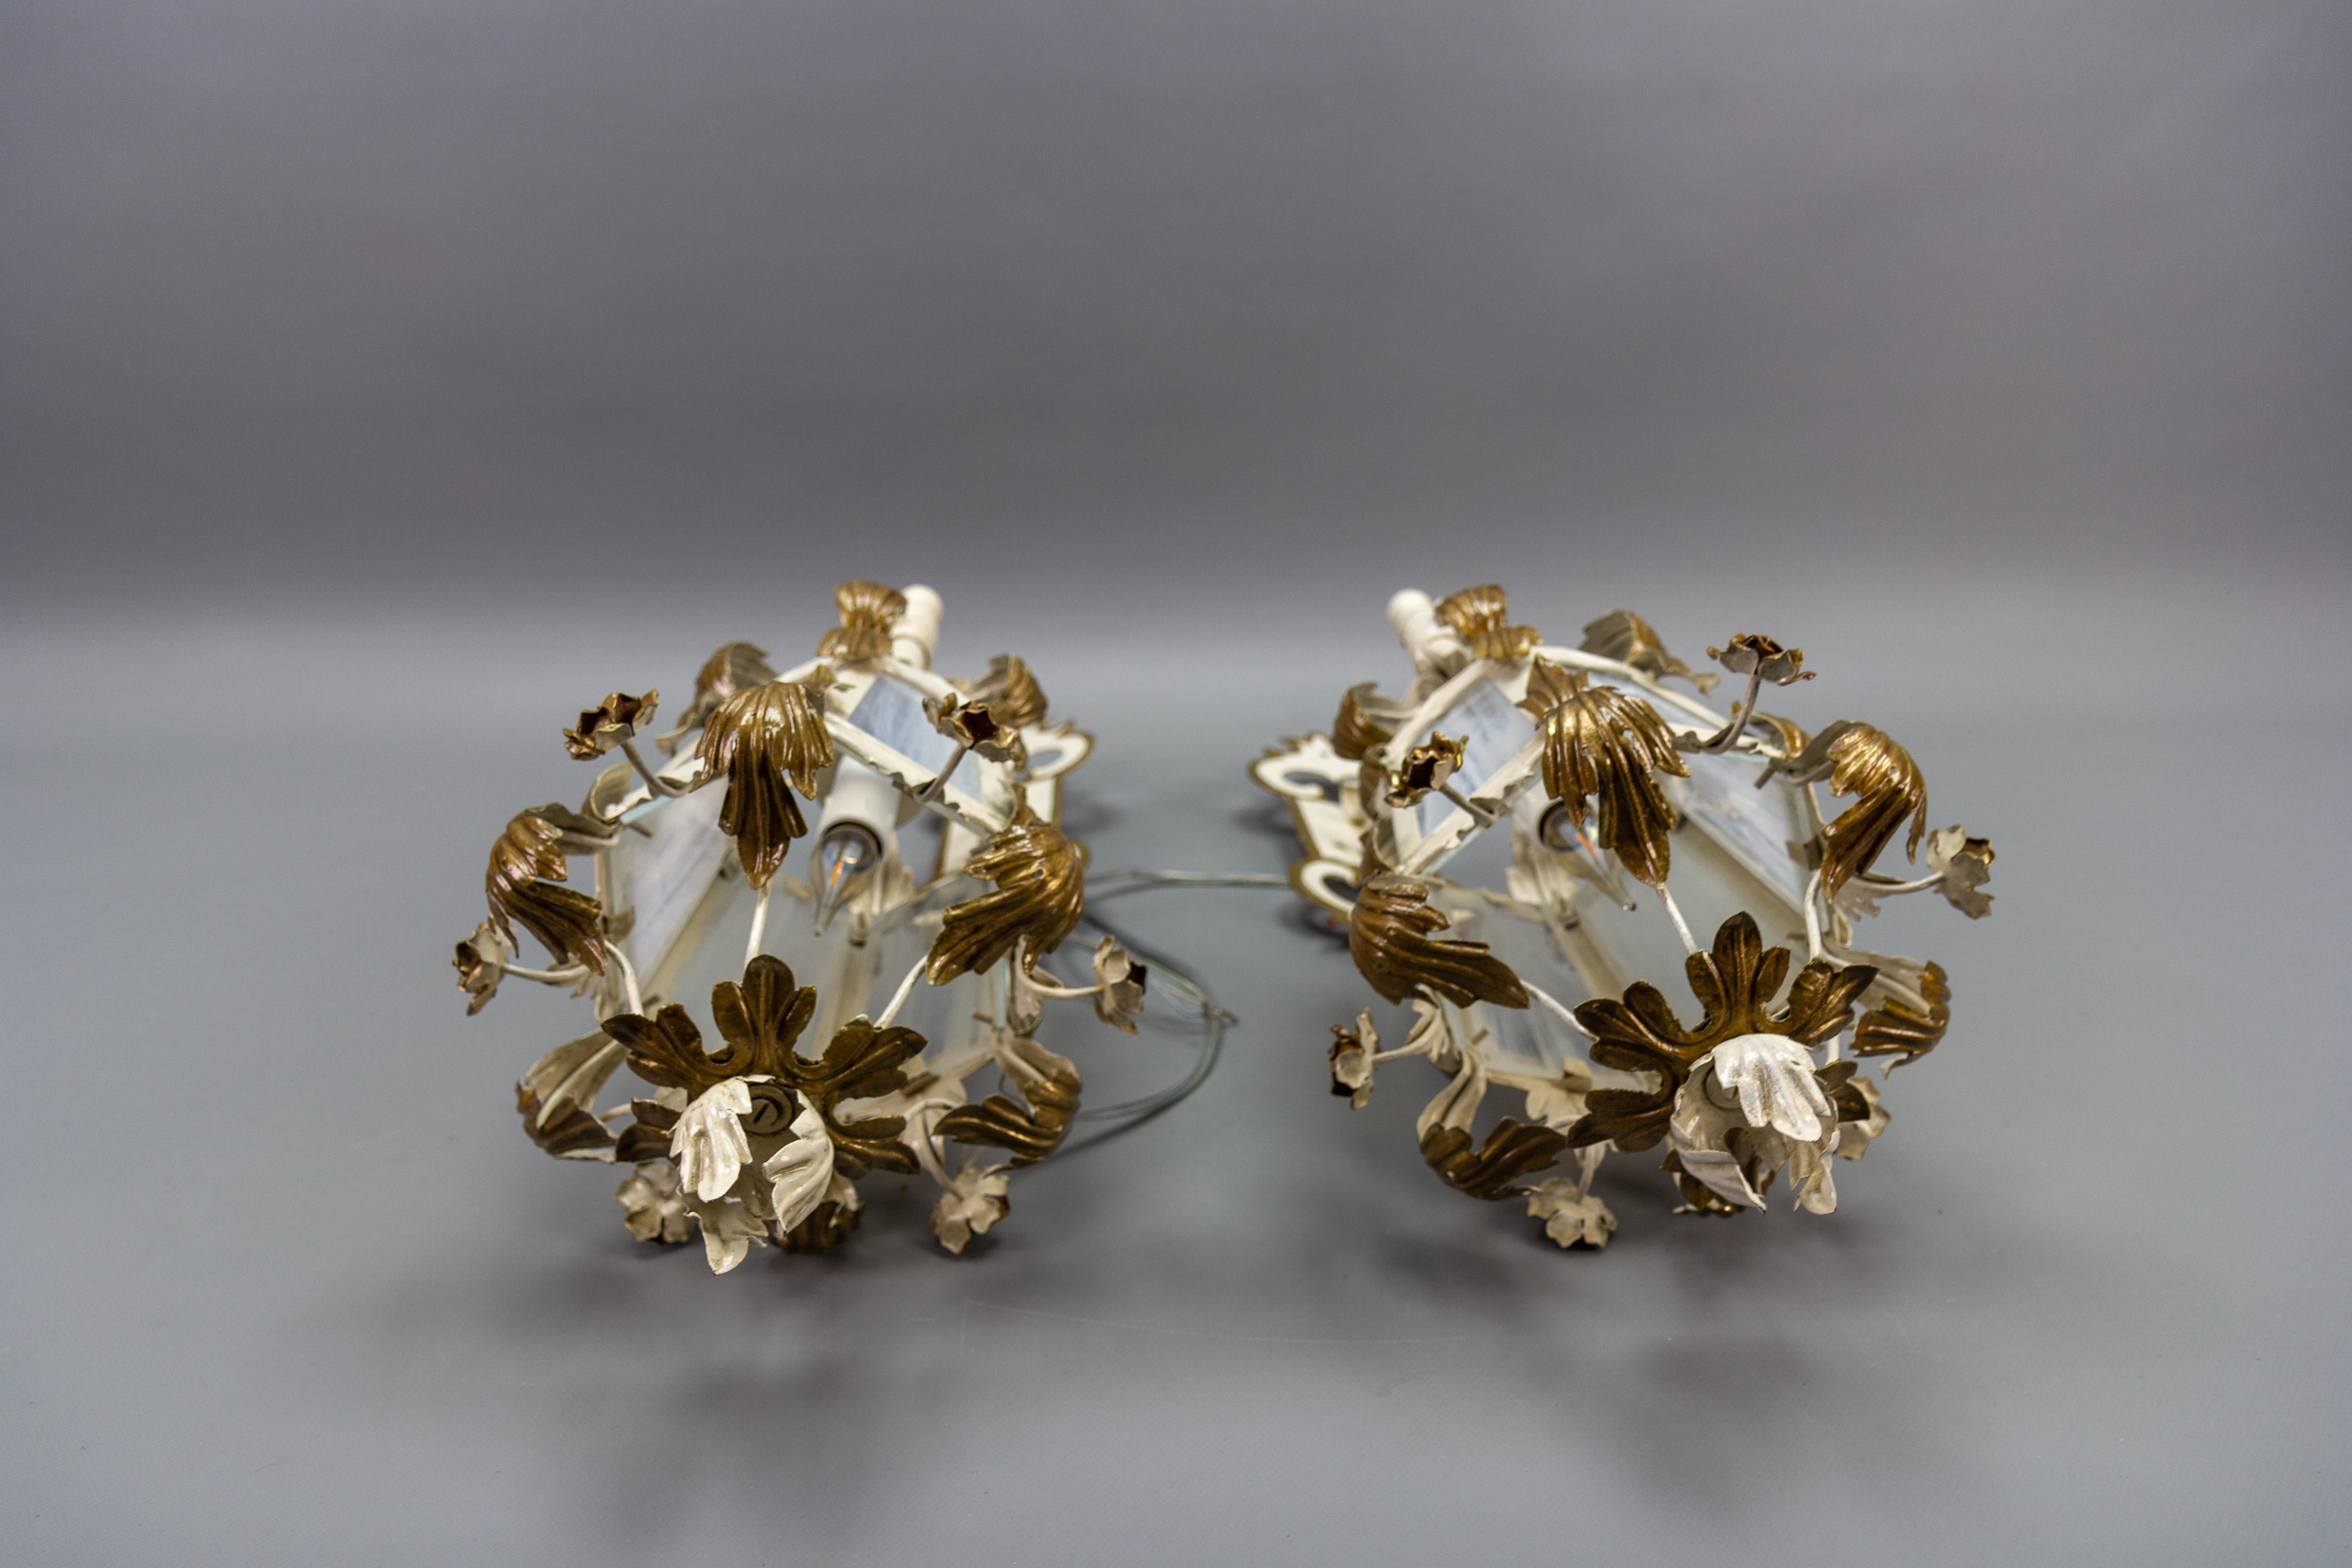 Pair of Italian White and Golden Color Metal and Glass Wall Lanterns, ca. 1970s For Sale 10